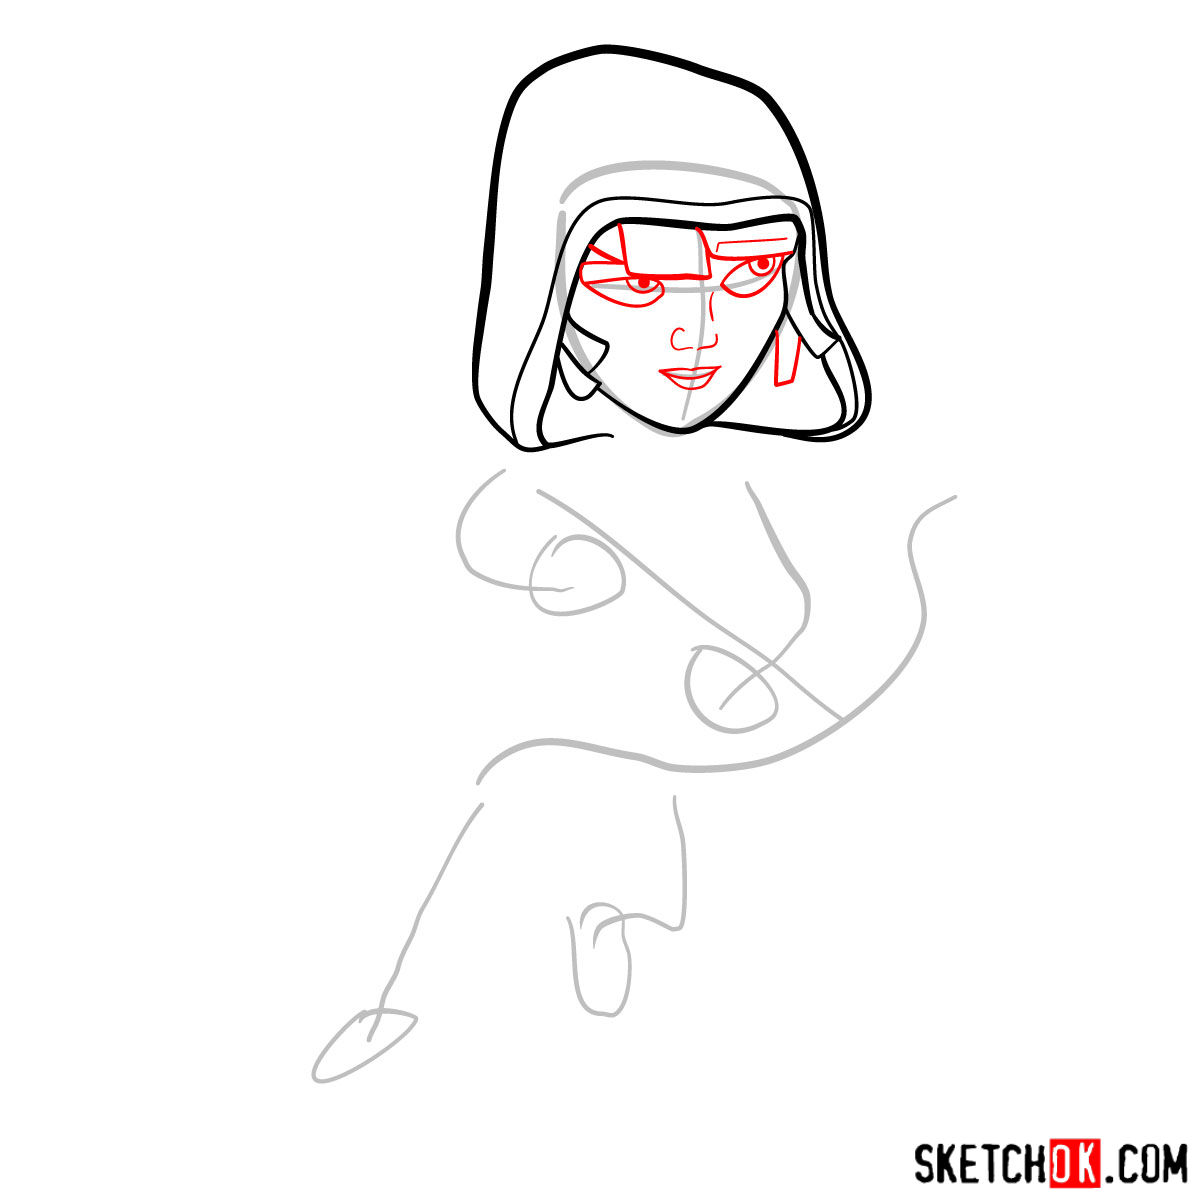 How to draw Sneaky Archer from Clash of Clans - step 03